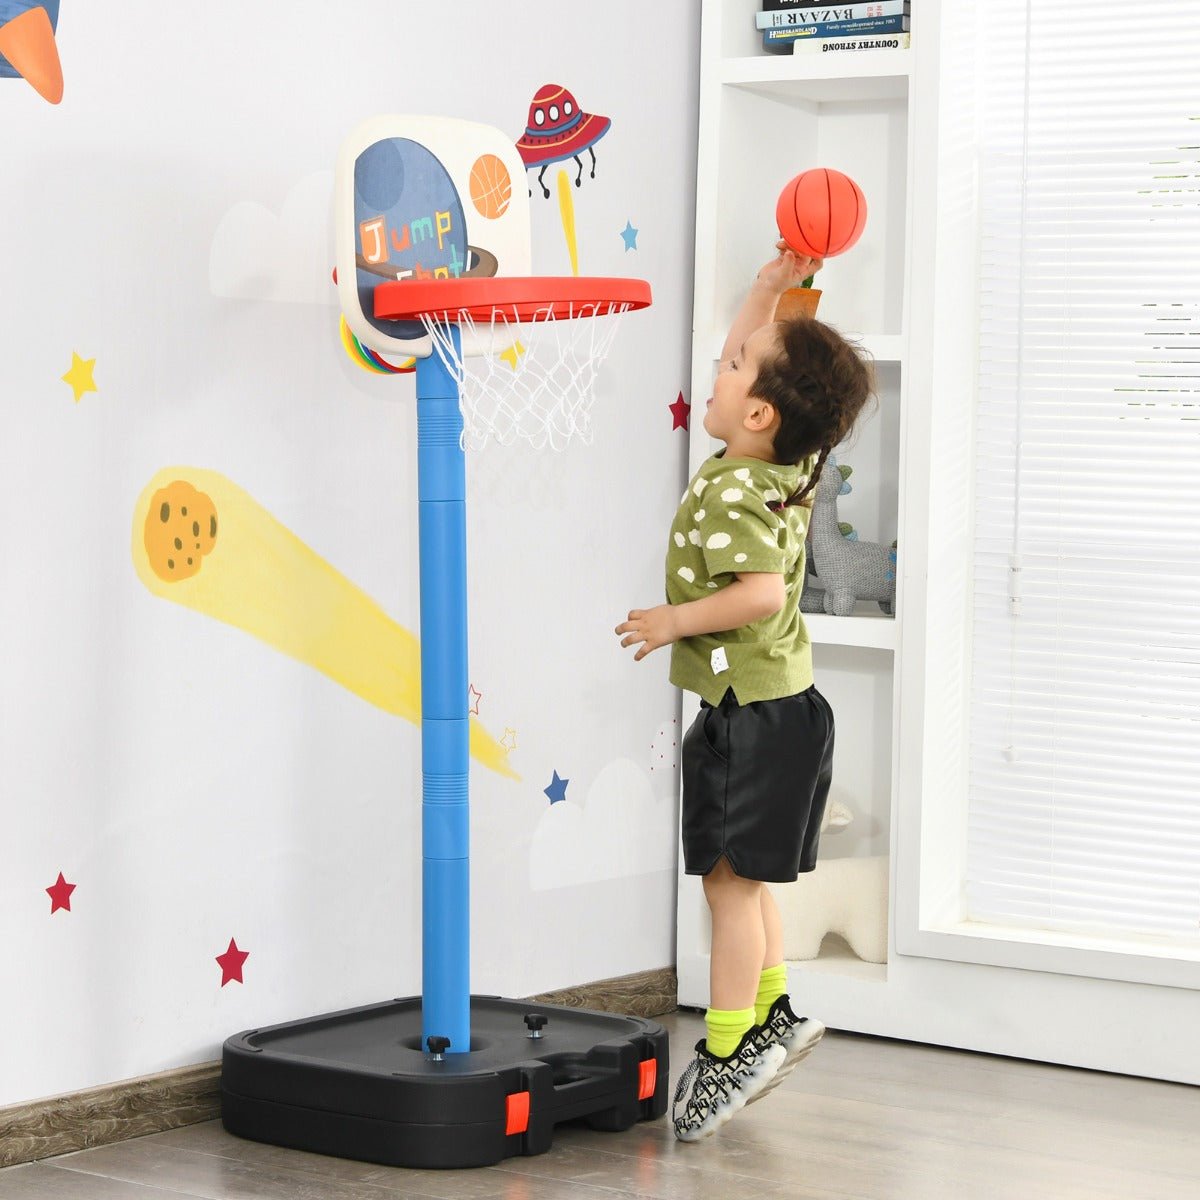 2-in-1 Basketball Set with Ring Toss: Dual Active Play Experience